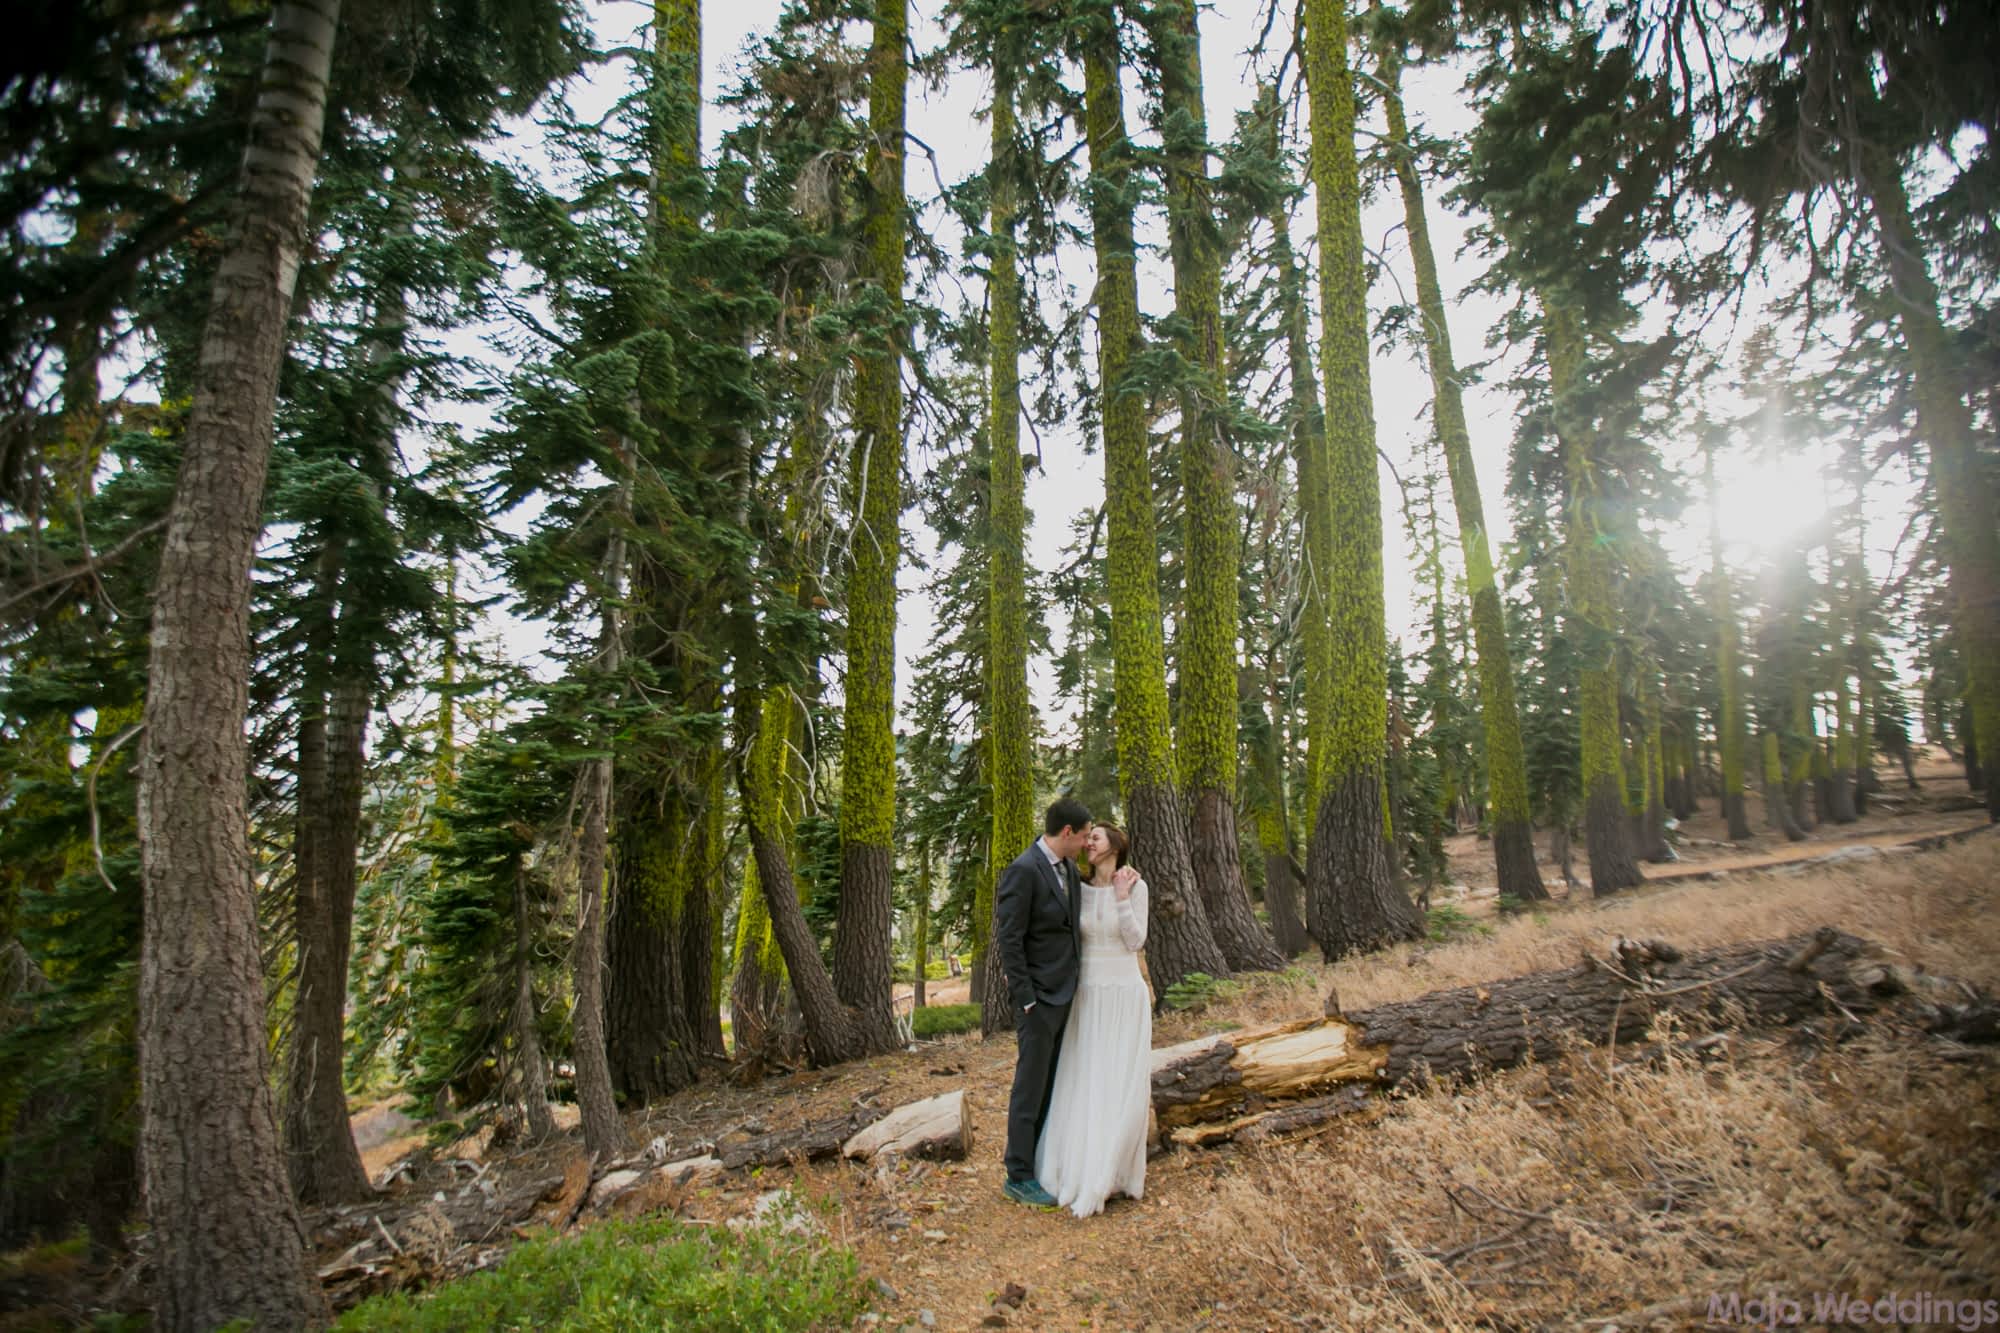 Now in their wedding attire, the bride and groom hold each other in front of moss covered trees and the sun streams in behind them.